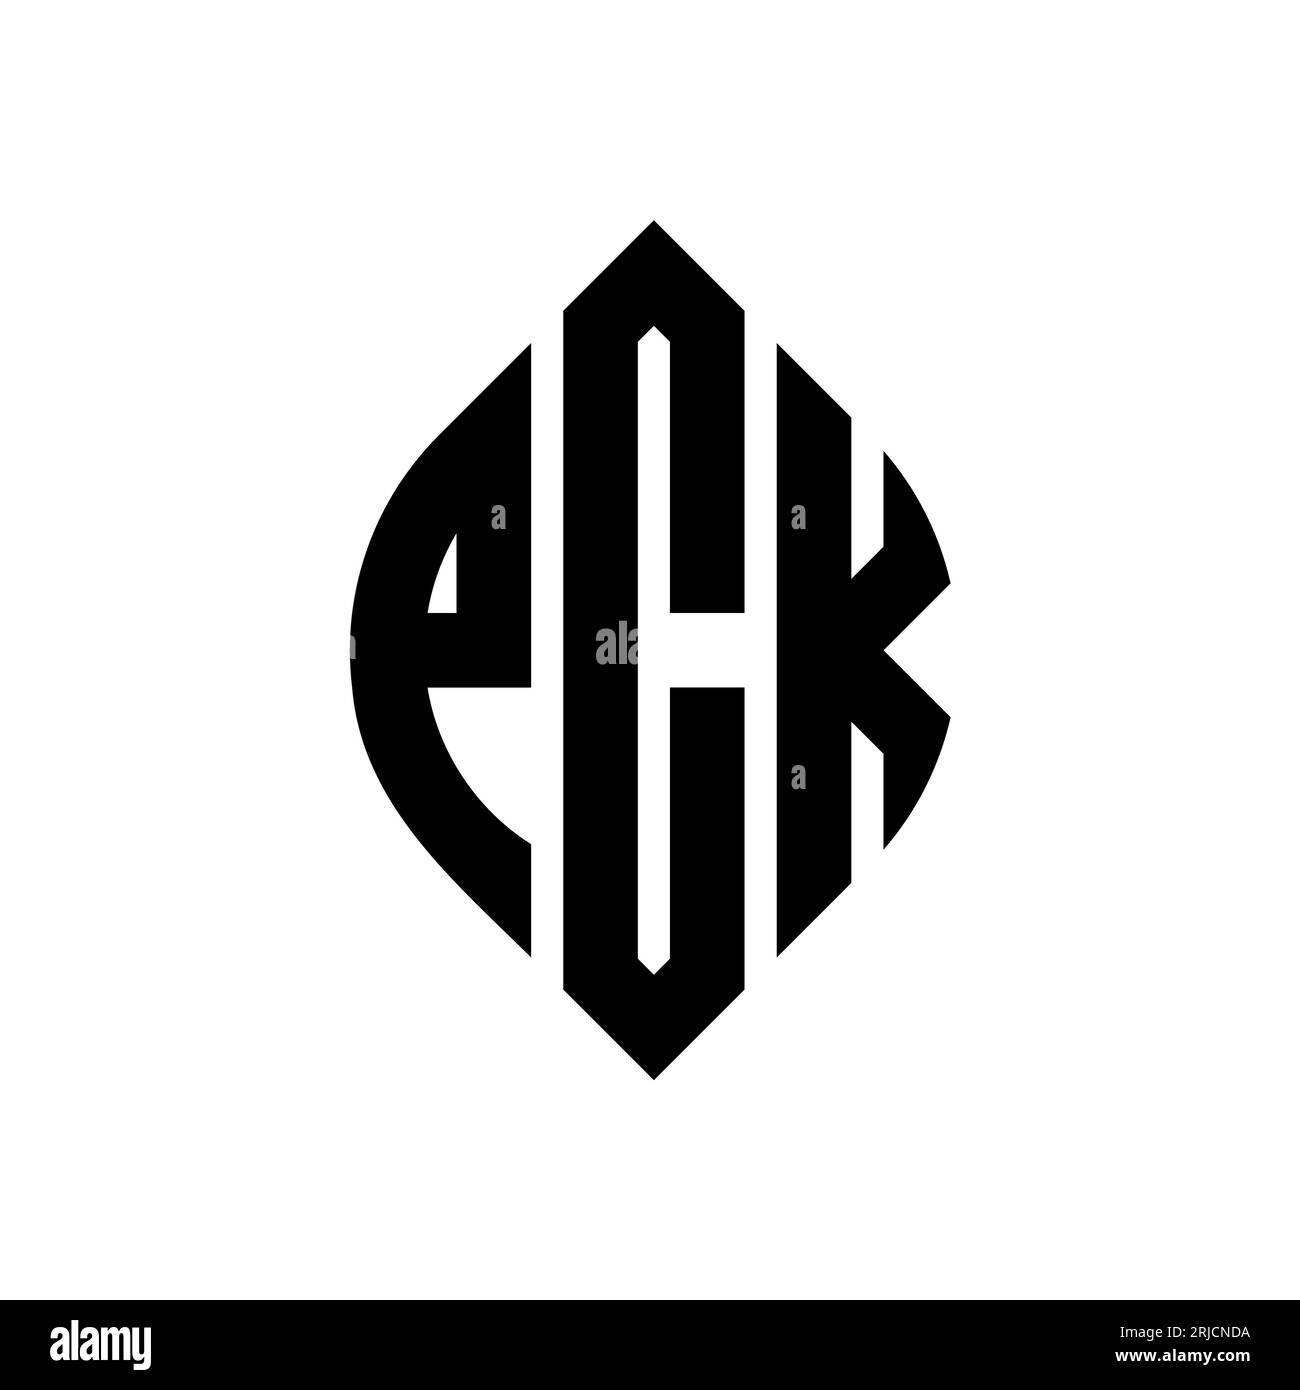 PCK circle letter logo design with circle and ellipse shape. PCK ellipse letters with typographic style. The three initials form a circle logo. PCK Ci Stock Vector